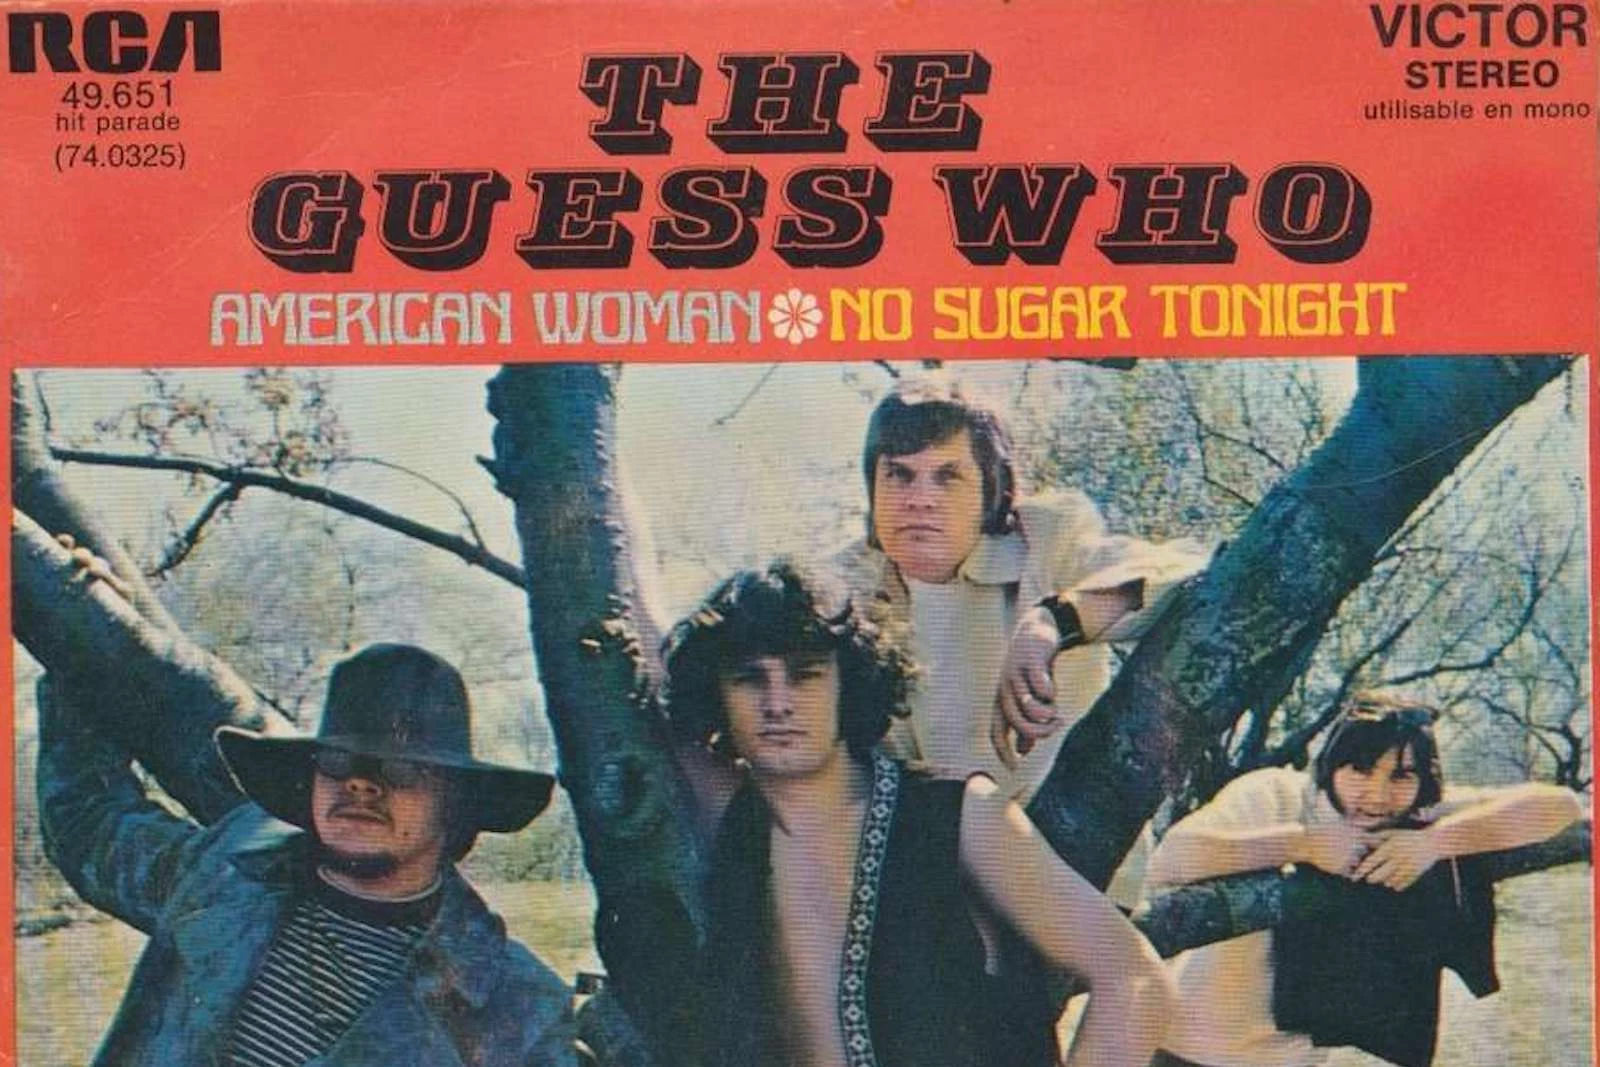 Top 10 Guess Who Songs